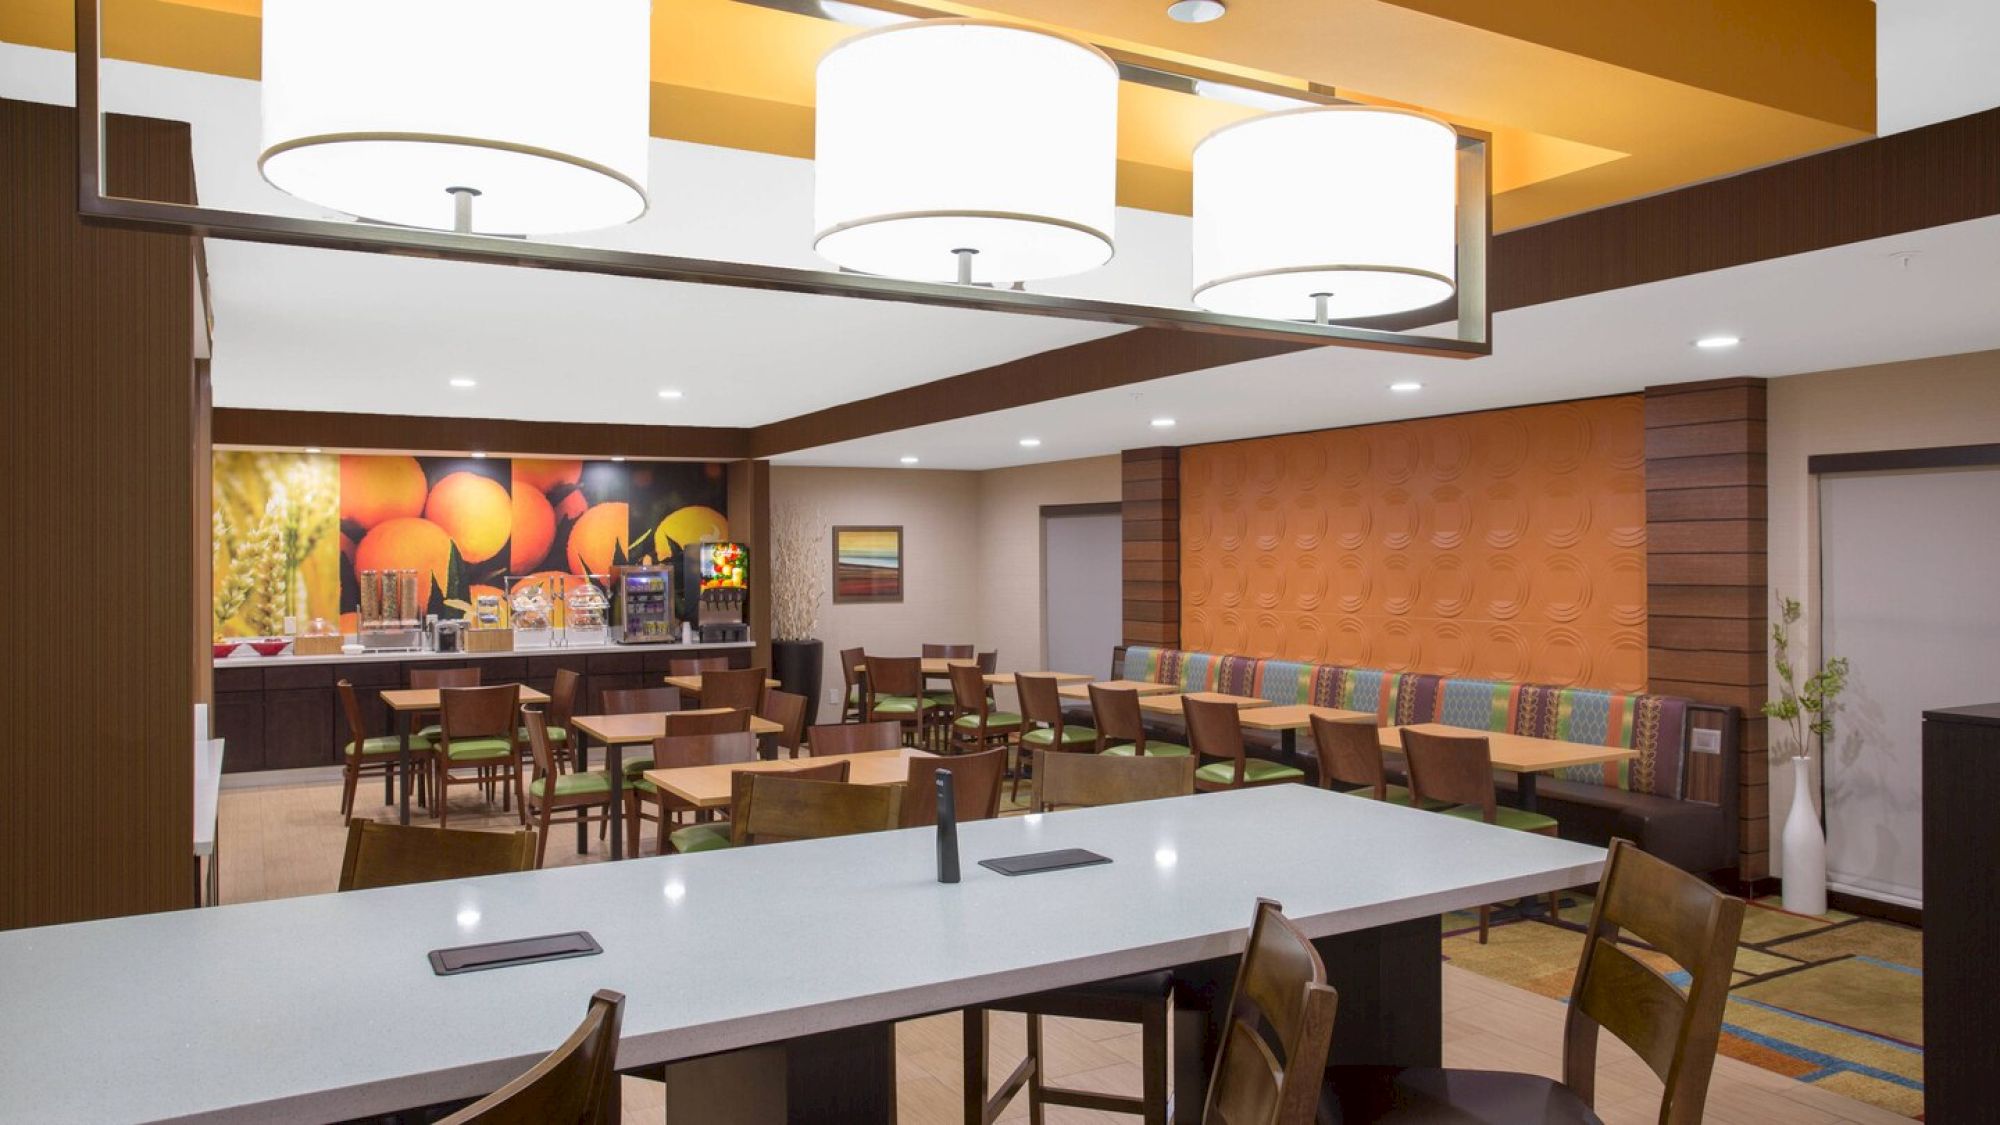 A spacious dining area features modern lighting, a variety of seating options, and a food service counter with a colorful mural in the background.